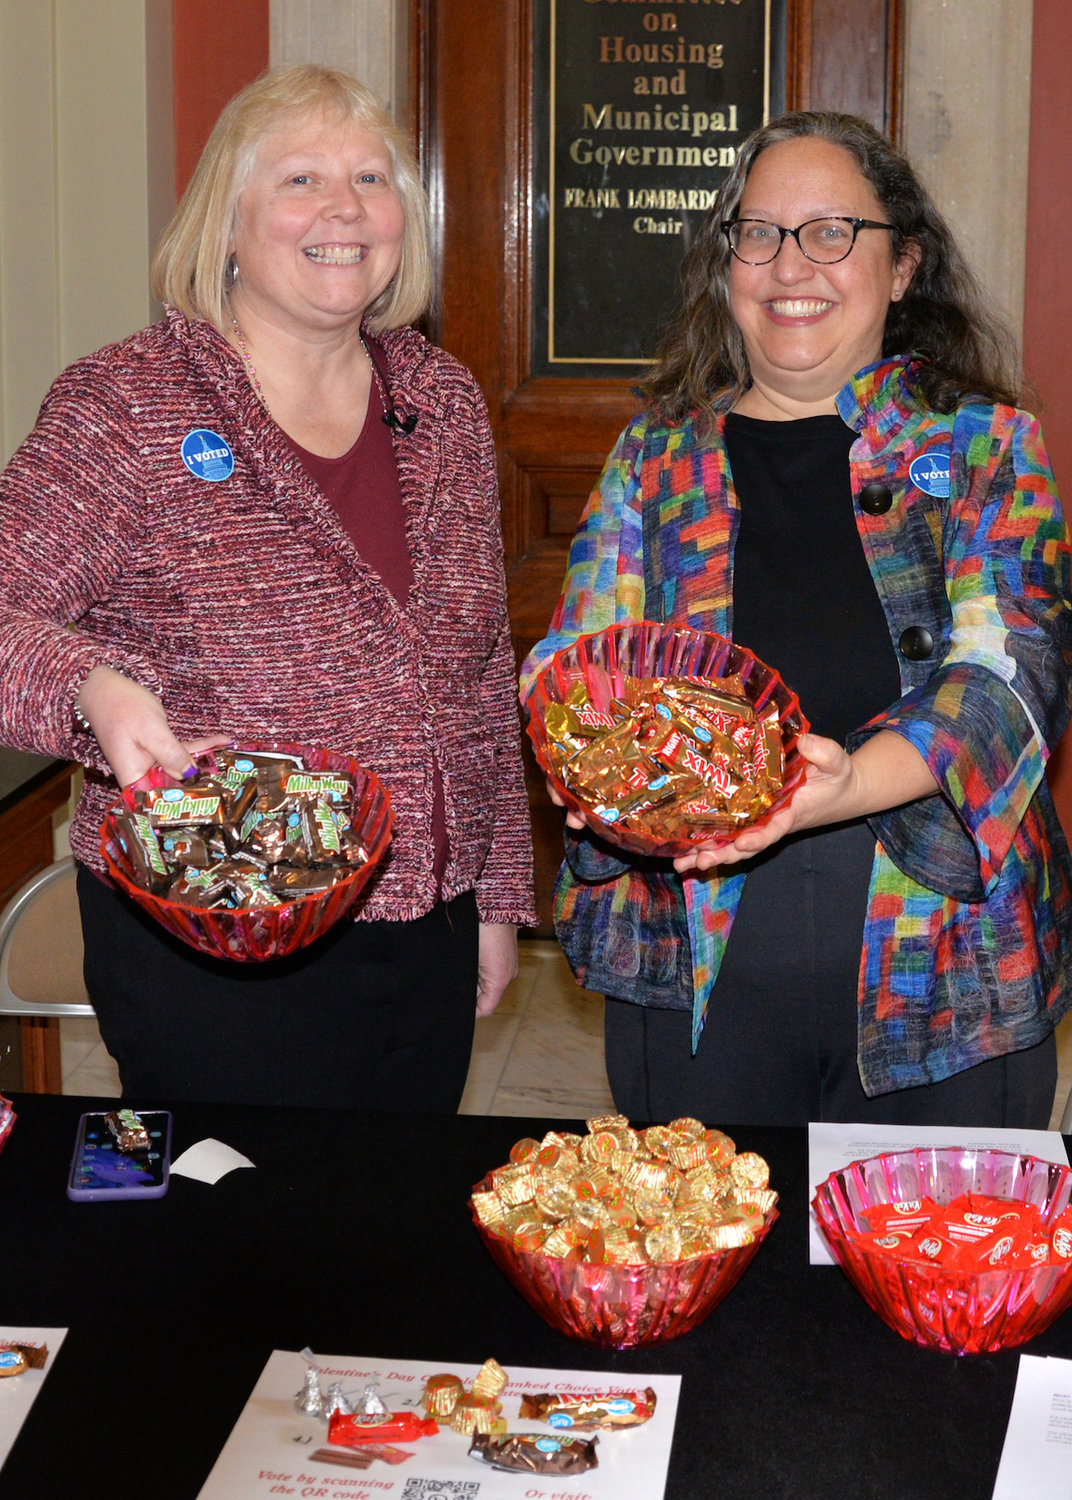 Sen. Valarie Lawson (left), a Democrat who represents District 14 in East Providence, and Rep. Rebecca Kislak, a fellow Dem from District 4 on the capital city’s East Side, used a “chocolate election” on Valentine’s Day Tuesday, Feb. 14, as the premise for a demonstration on ranked-choice voting, about which each submitted formative legislation to their respective chambers earlier in the week.